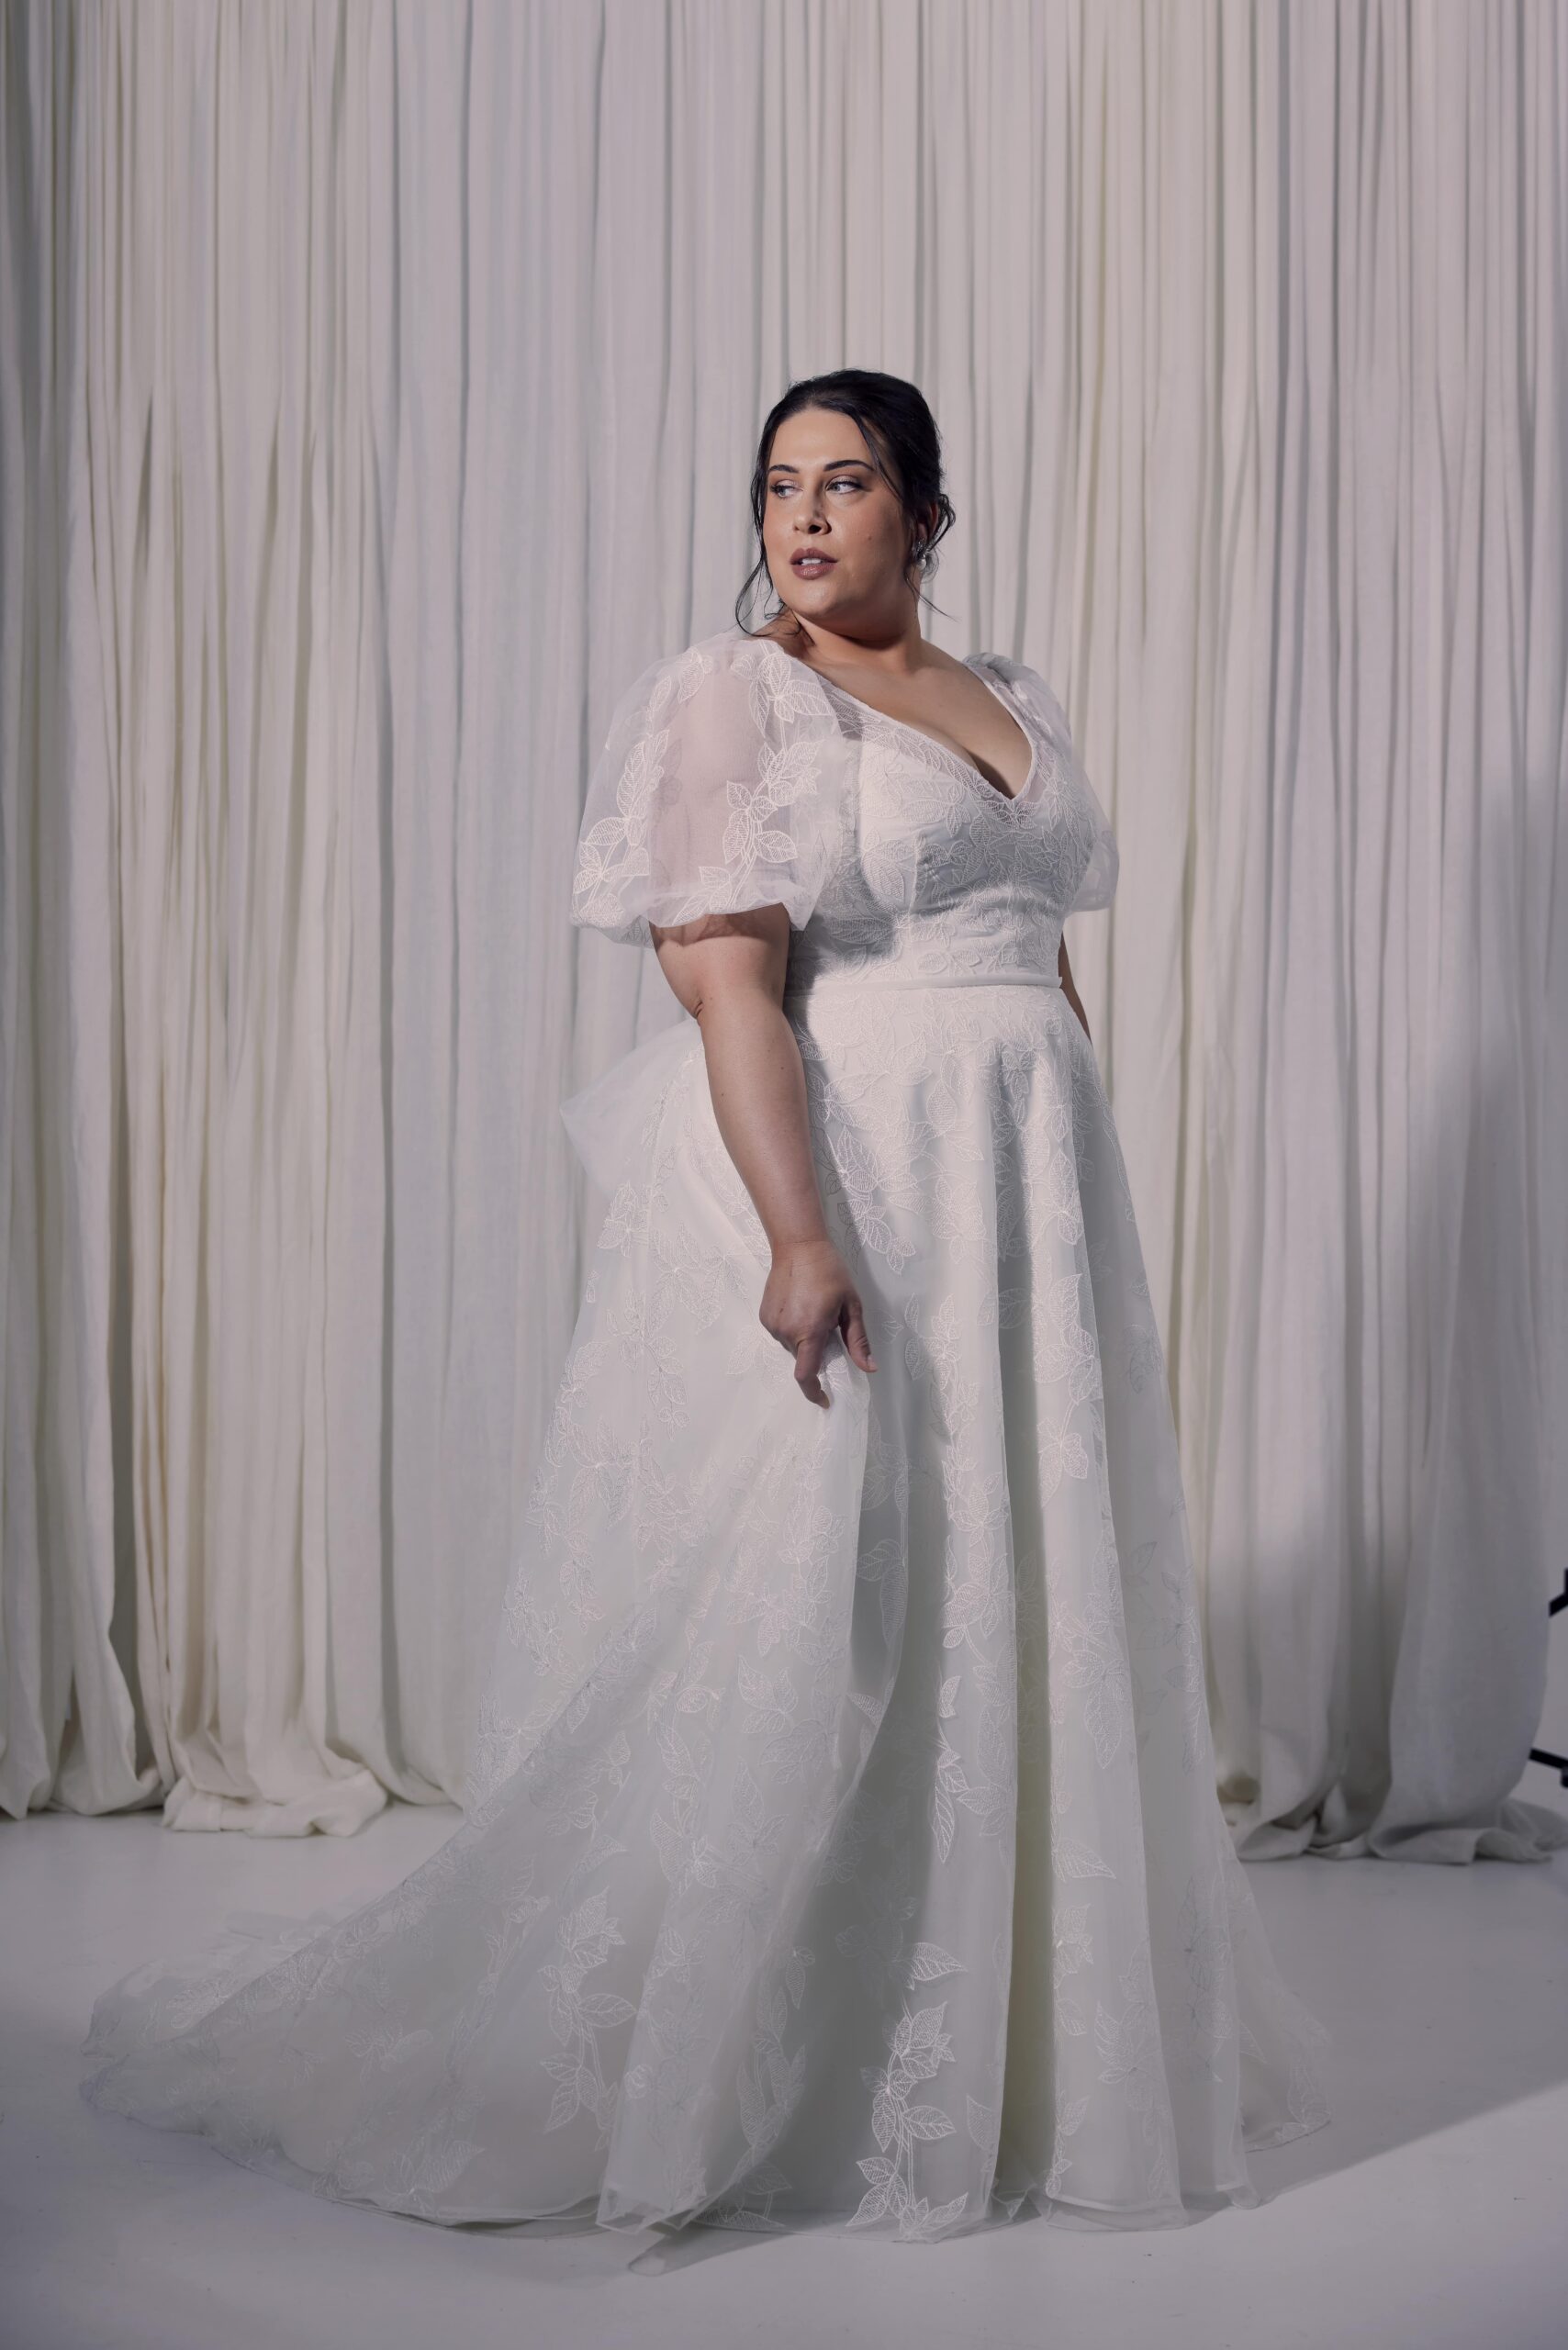 The Floretta gown - an A-line embroidered tulle gown with all-over leaf design. Floretta features a v-neckline with sheer puff sleeves and a satin underbodice.